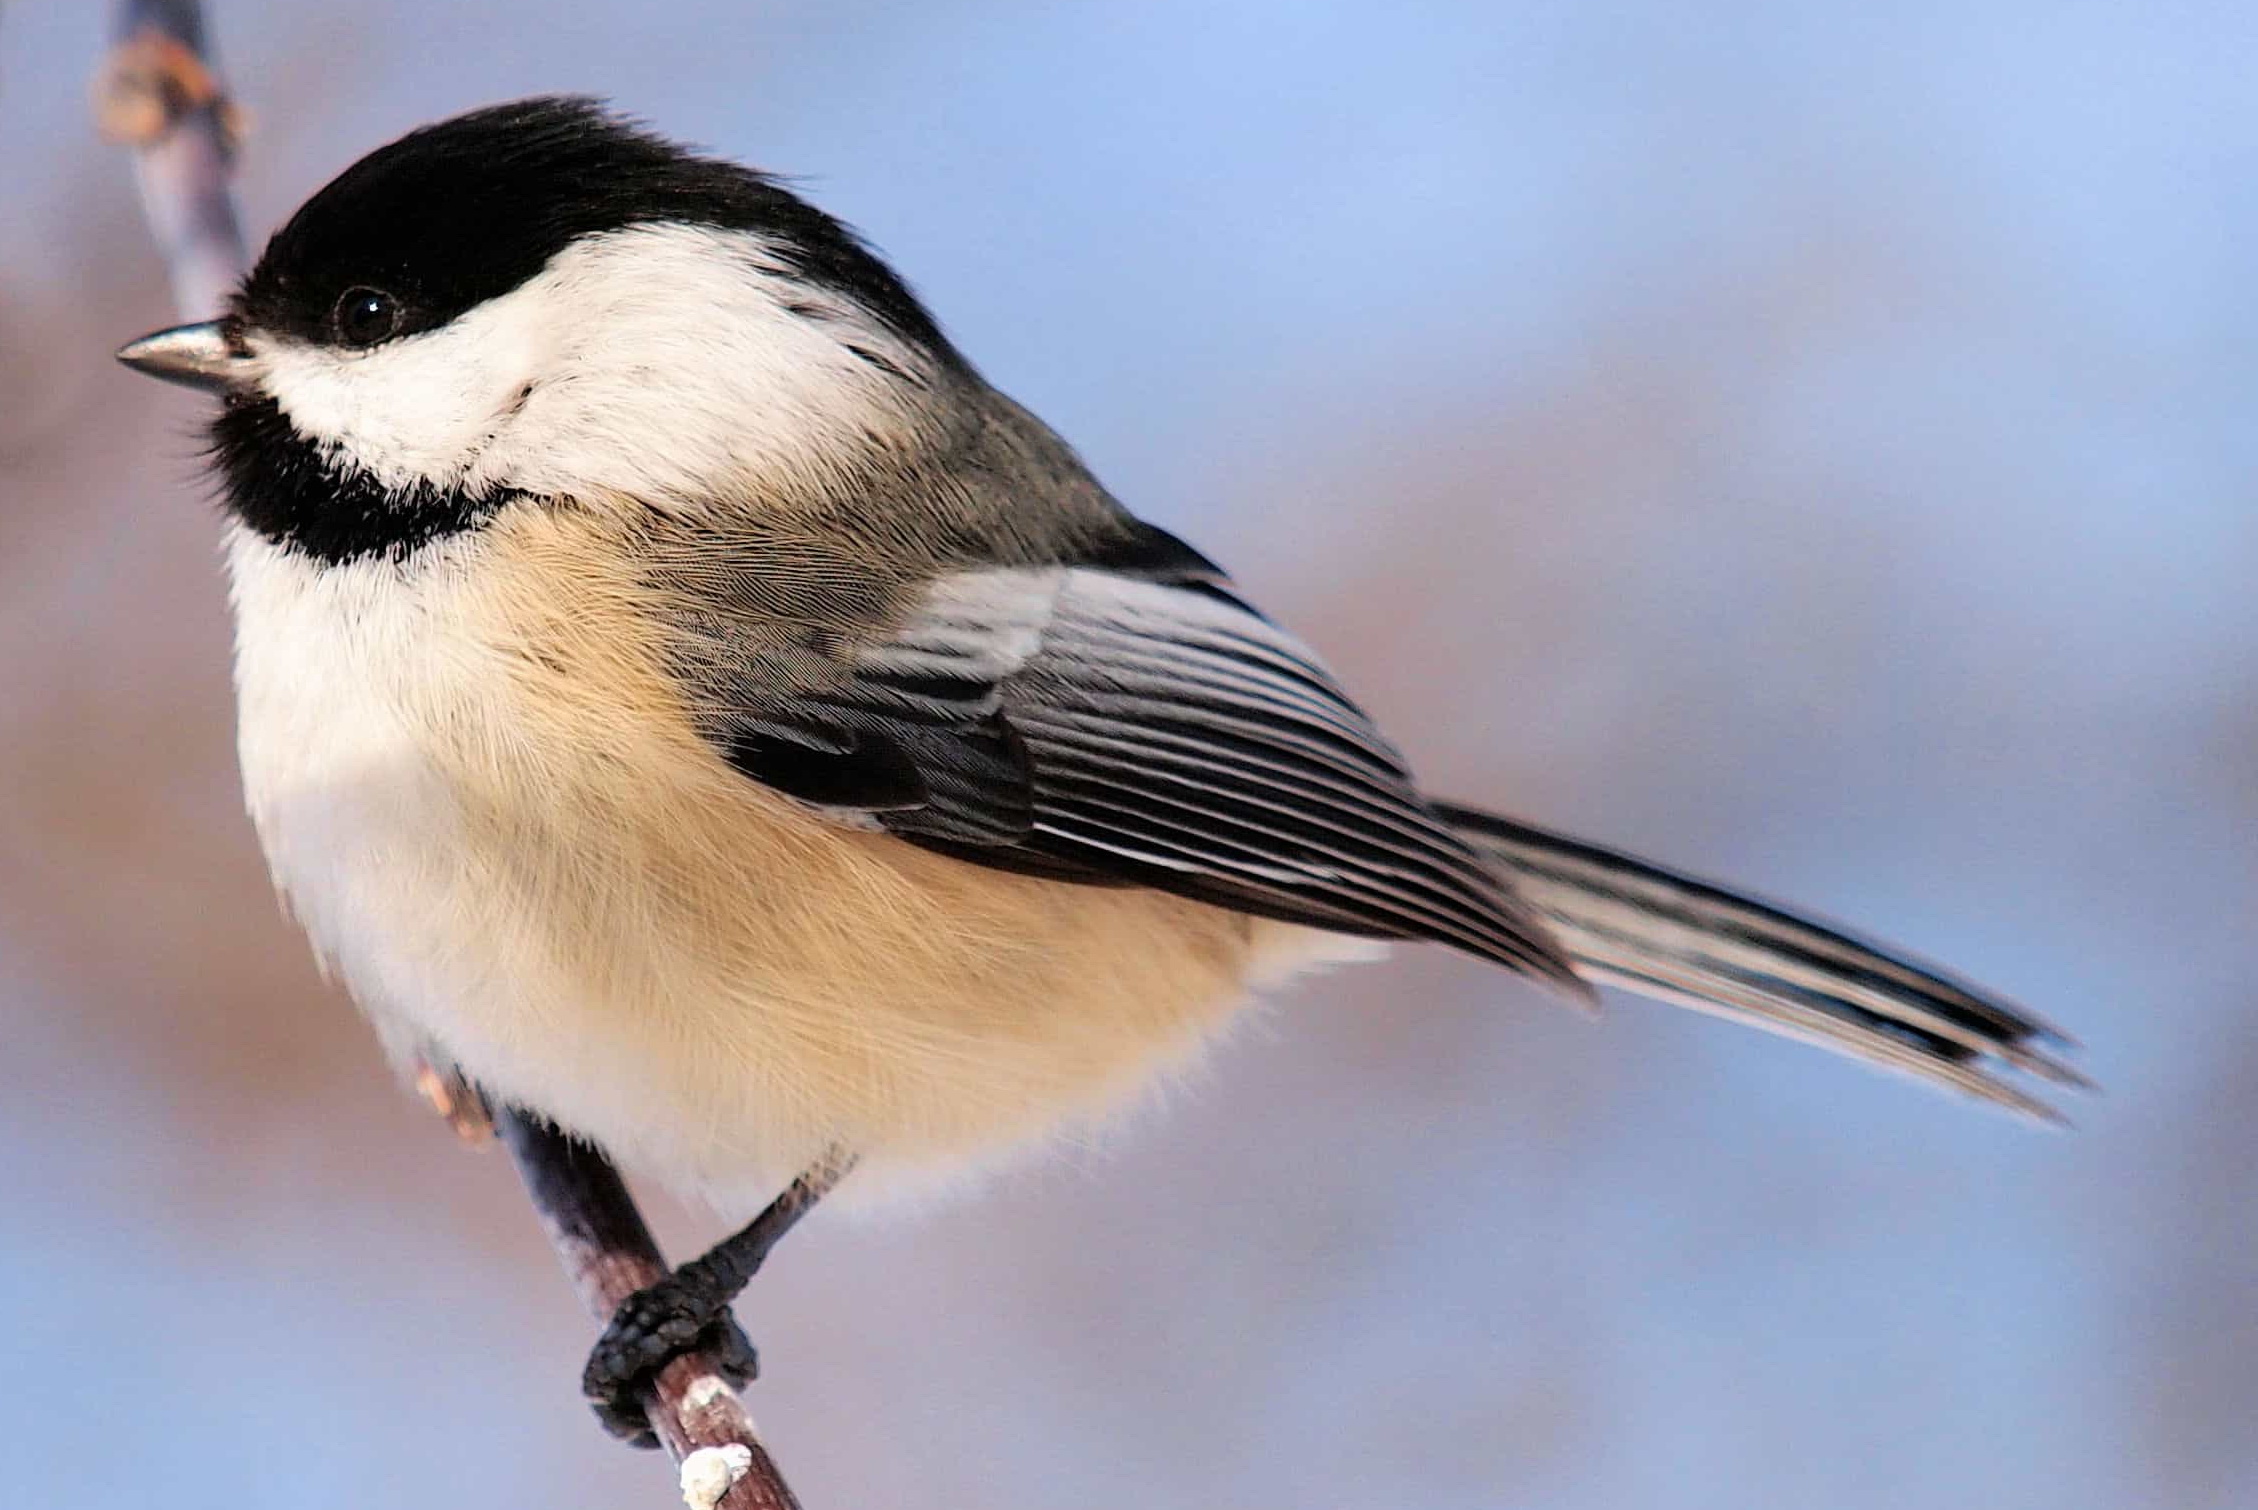 Associated image for entry 'chickadee'